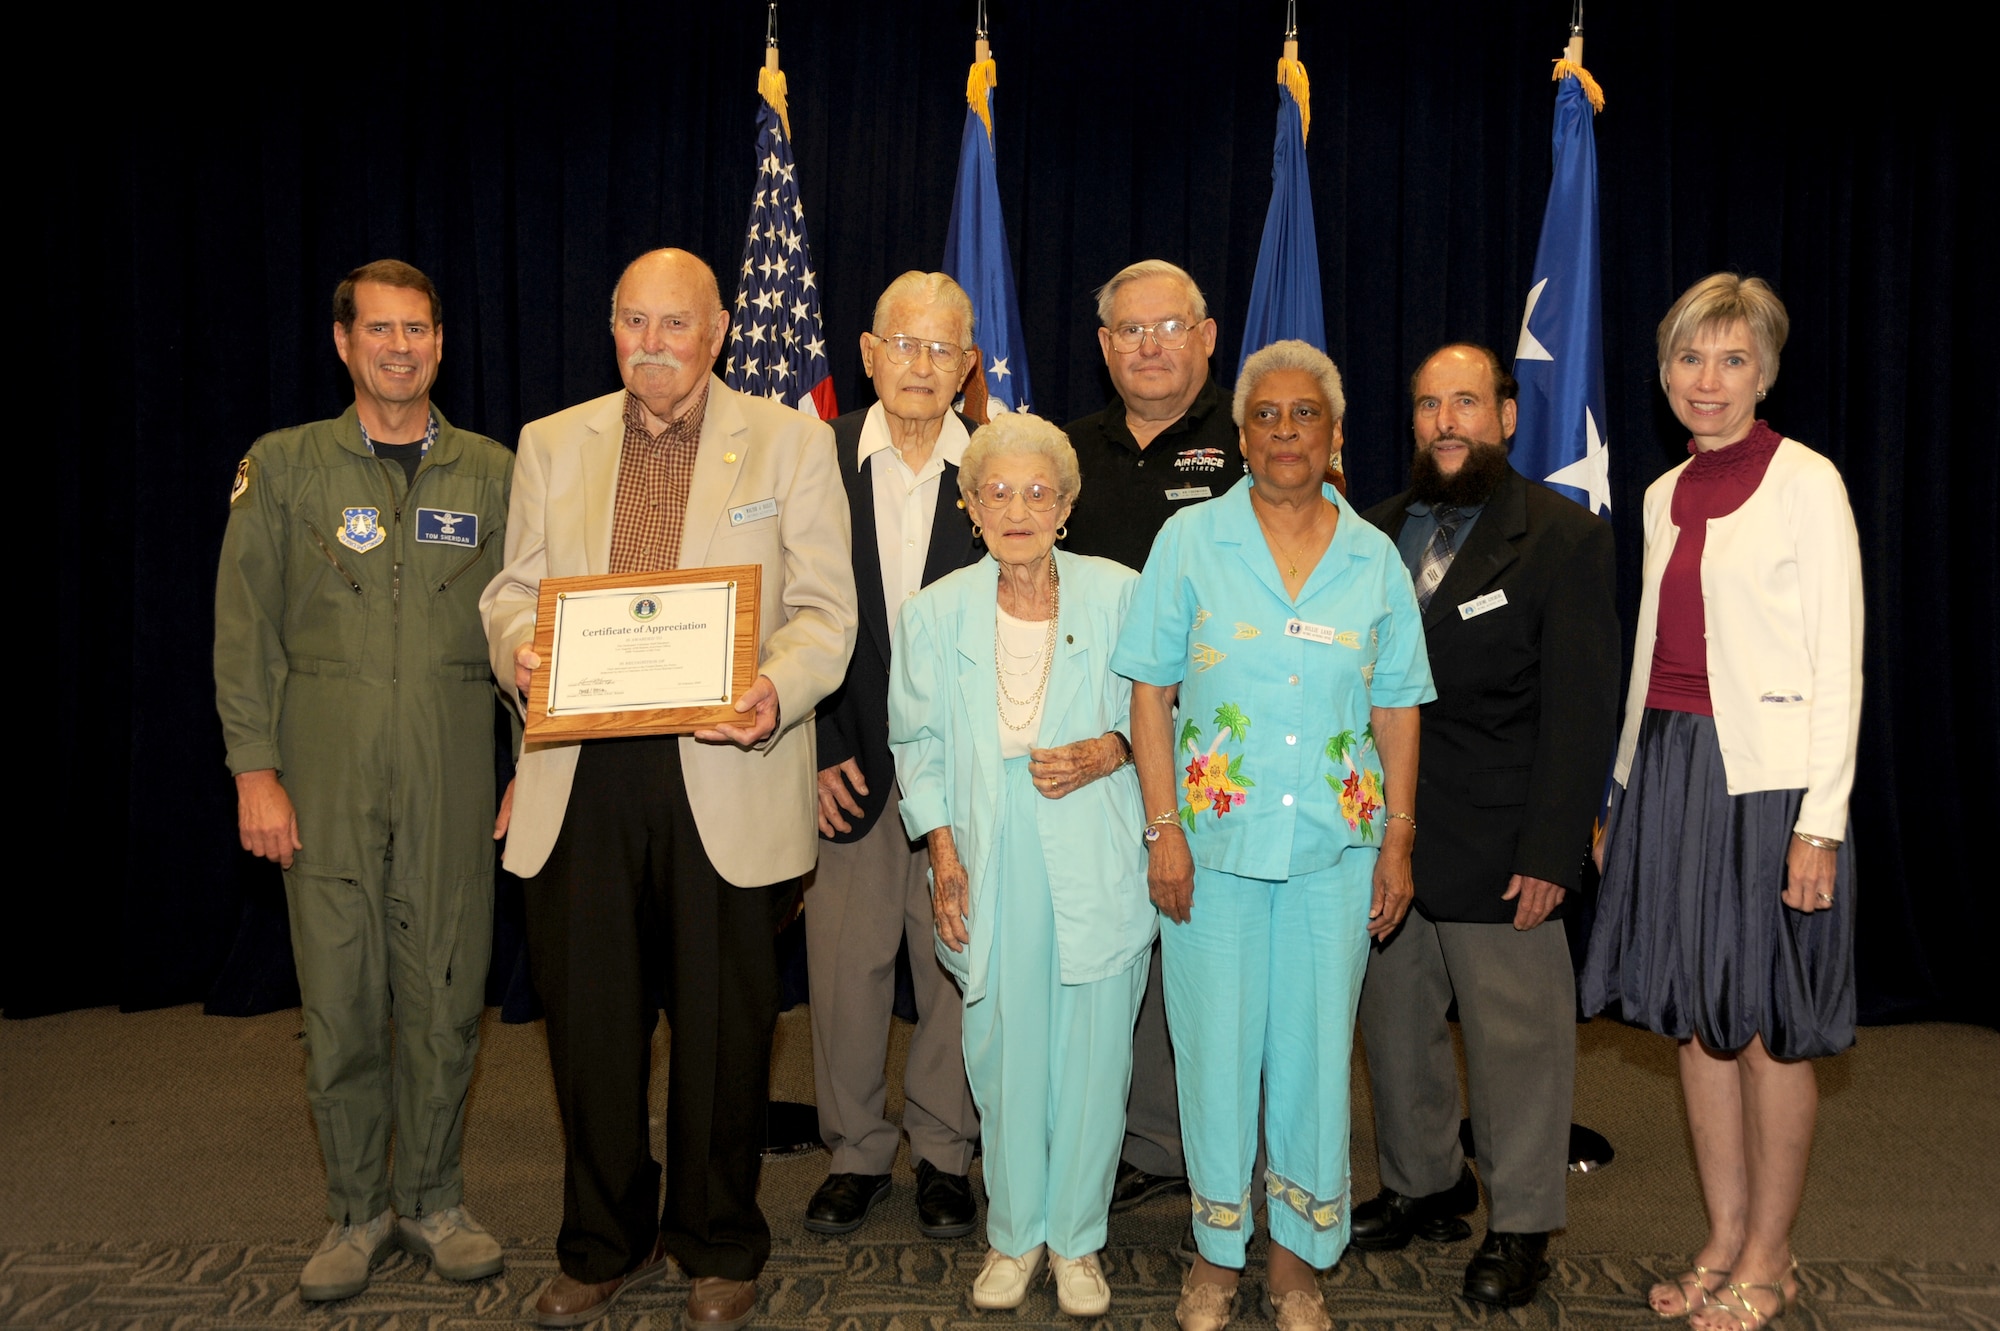 Lt. Gen. and Mrs. Sheridan  are pictured with members of the winning the Retiree Activities Office team